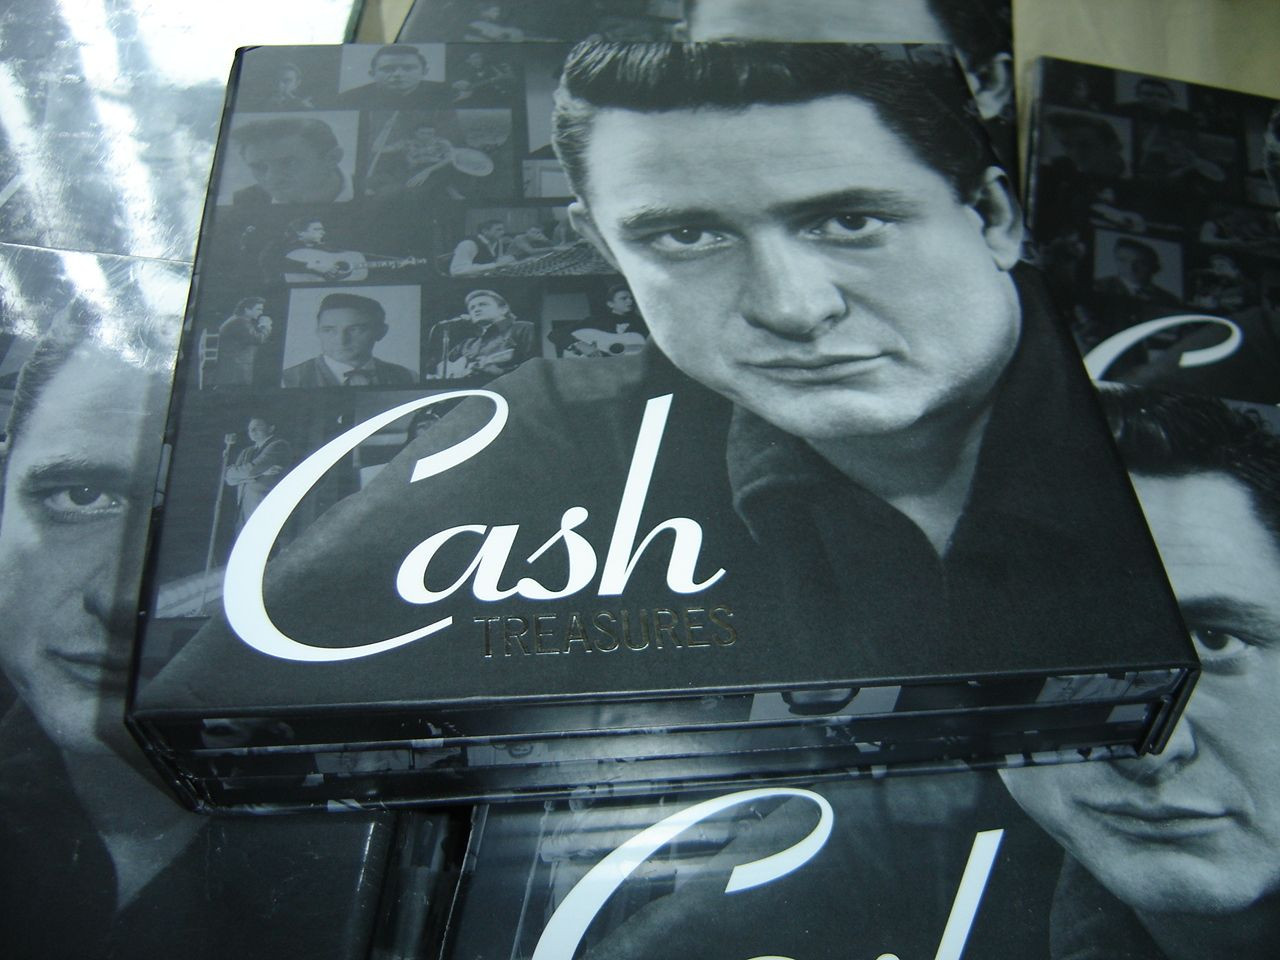 Cash Treasures / Johnny Cash: The Hits, Duets, Gospel Singer - 3 CD  Collector's Set / 2013 Sony Music Entertainment / "Columbia" Release /  Design by Randall Martin - bibleinmylanguage